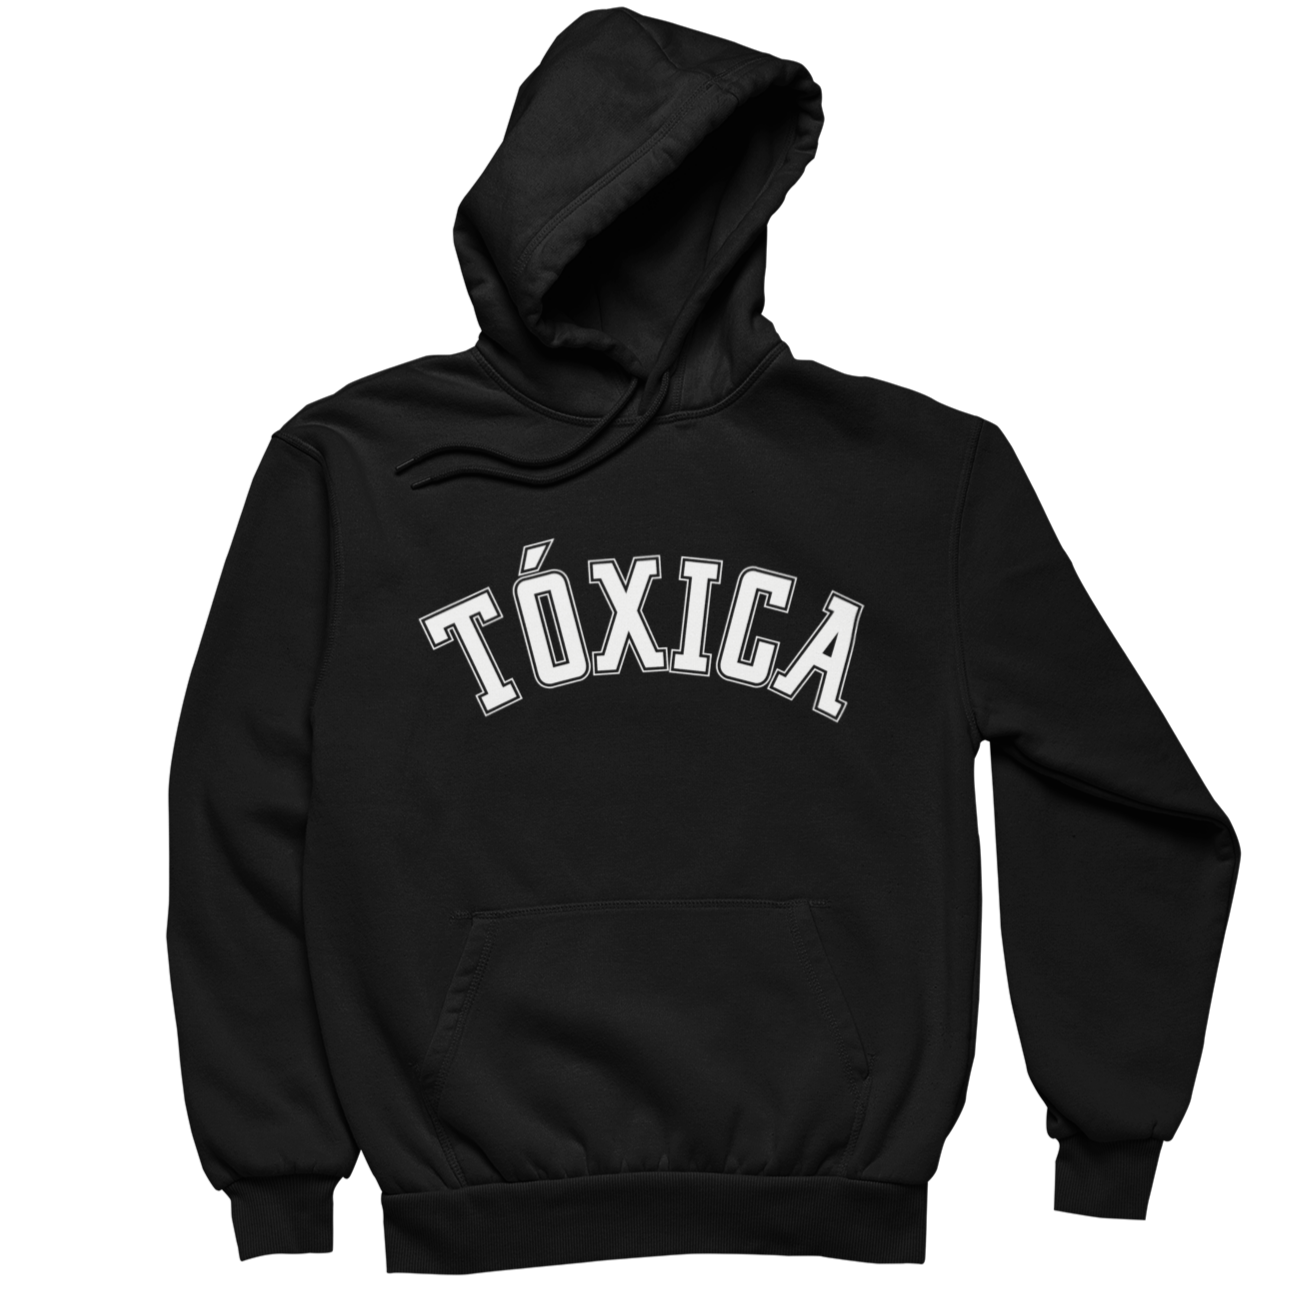 Black spanish hoodie sweatshirt for Latina women with the word 'Toxica' written in white varsity lettering